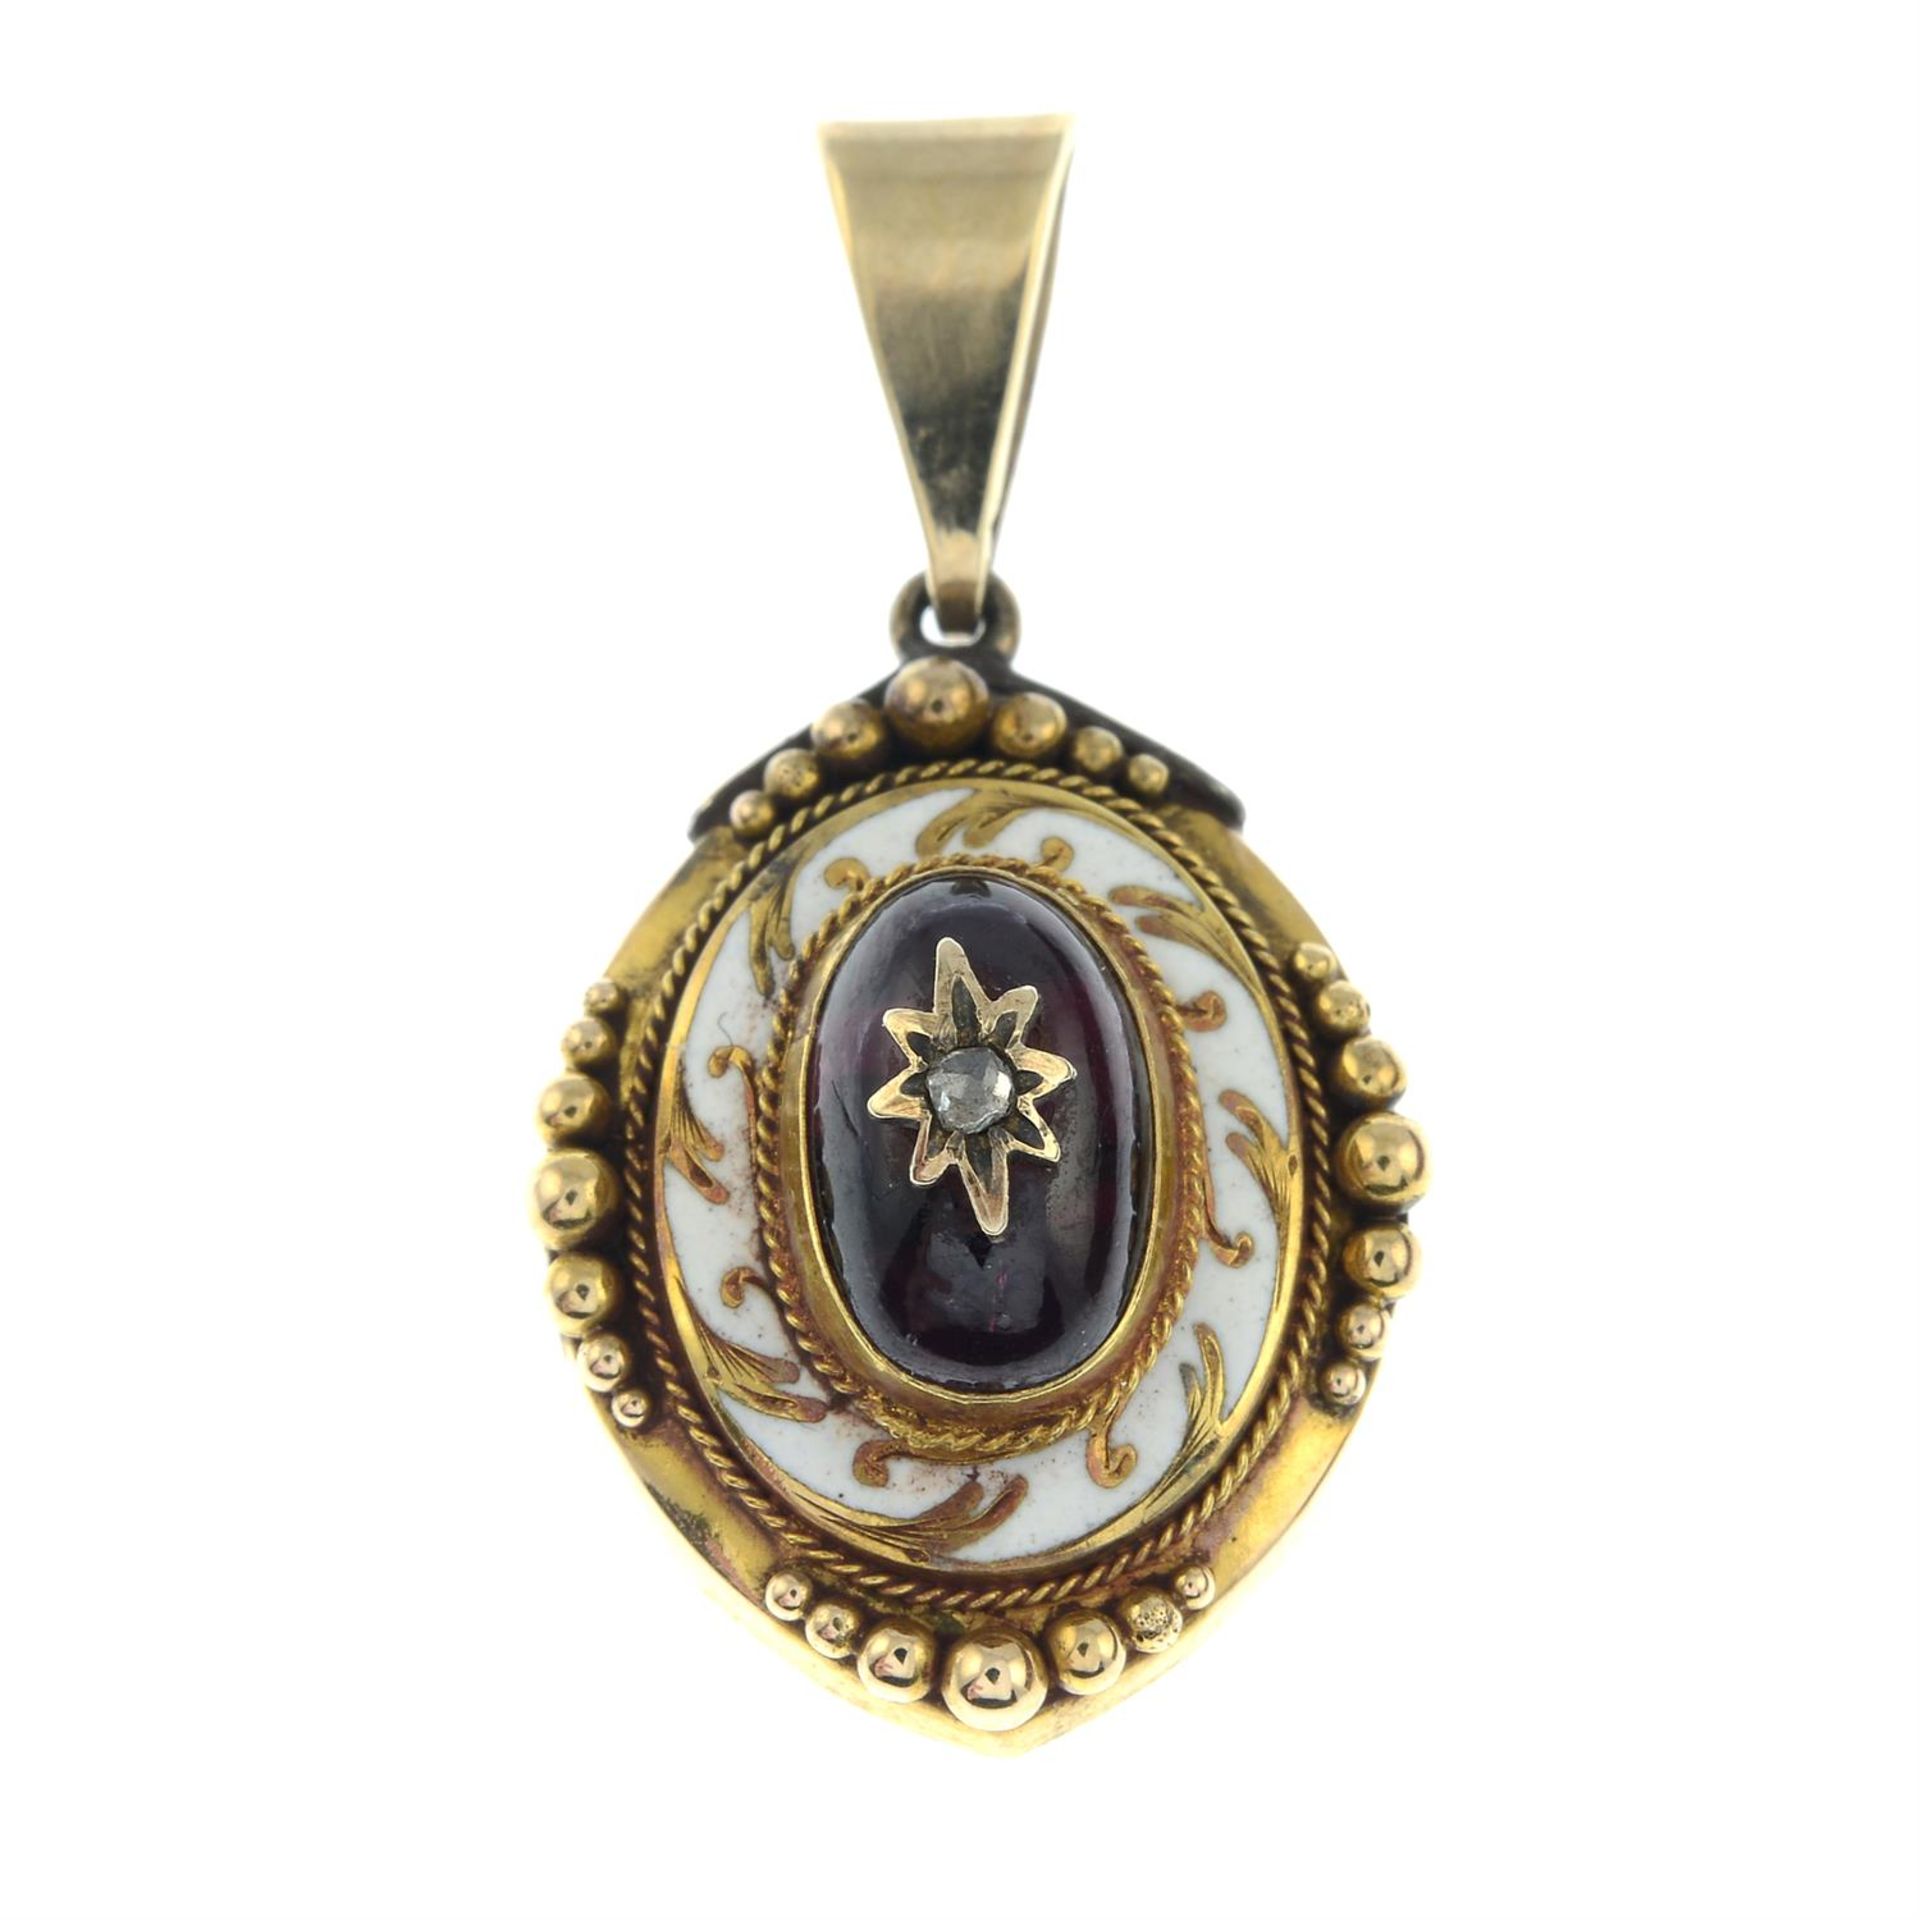 A rose-cut diamond, garnet and enamel pendant, converted from a 19th century gold clasp.